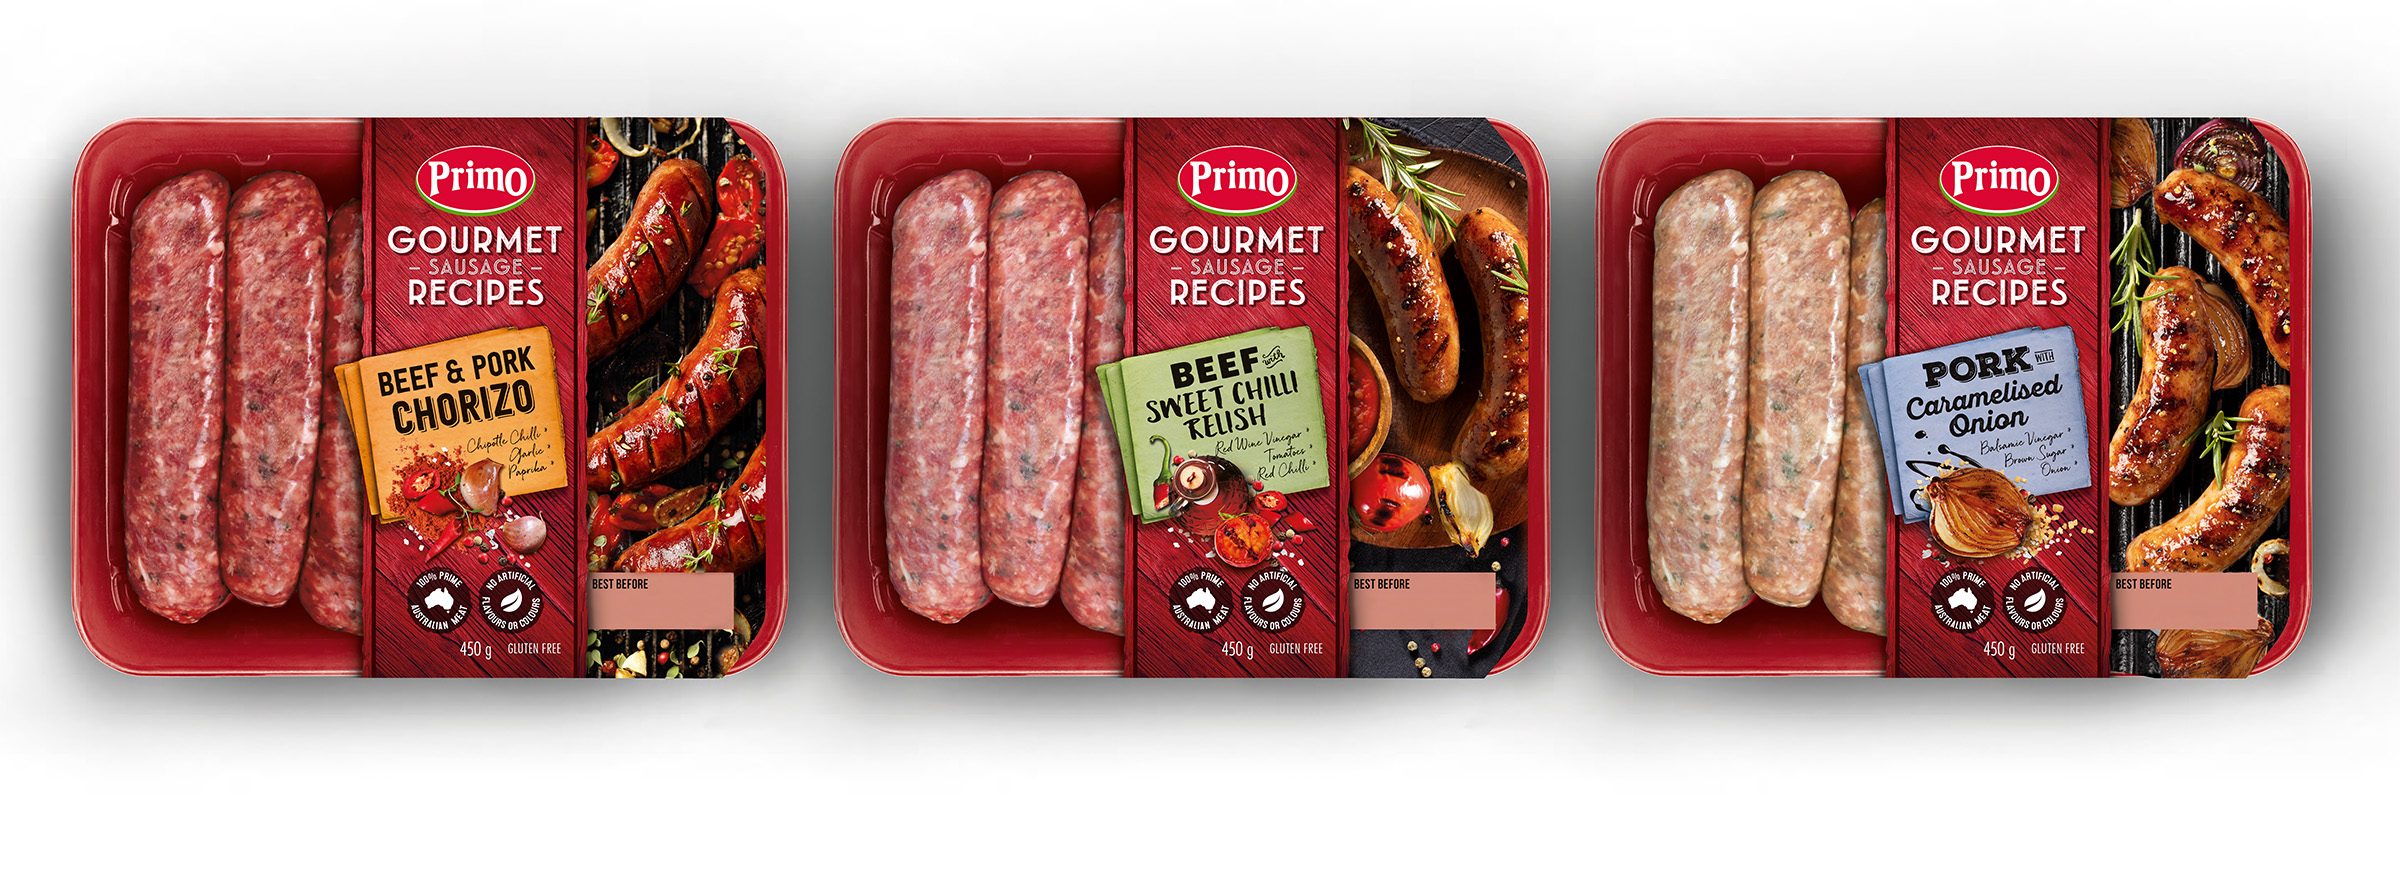 Advertising studio photography of 3 packets of Primo gourmet sausages